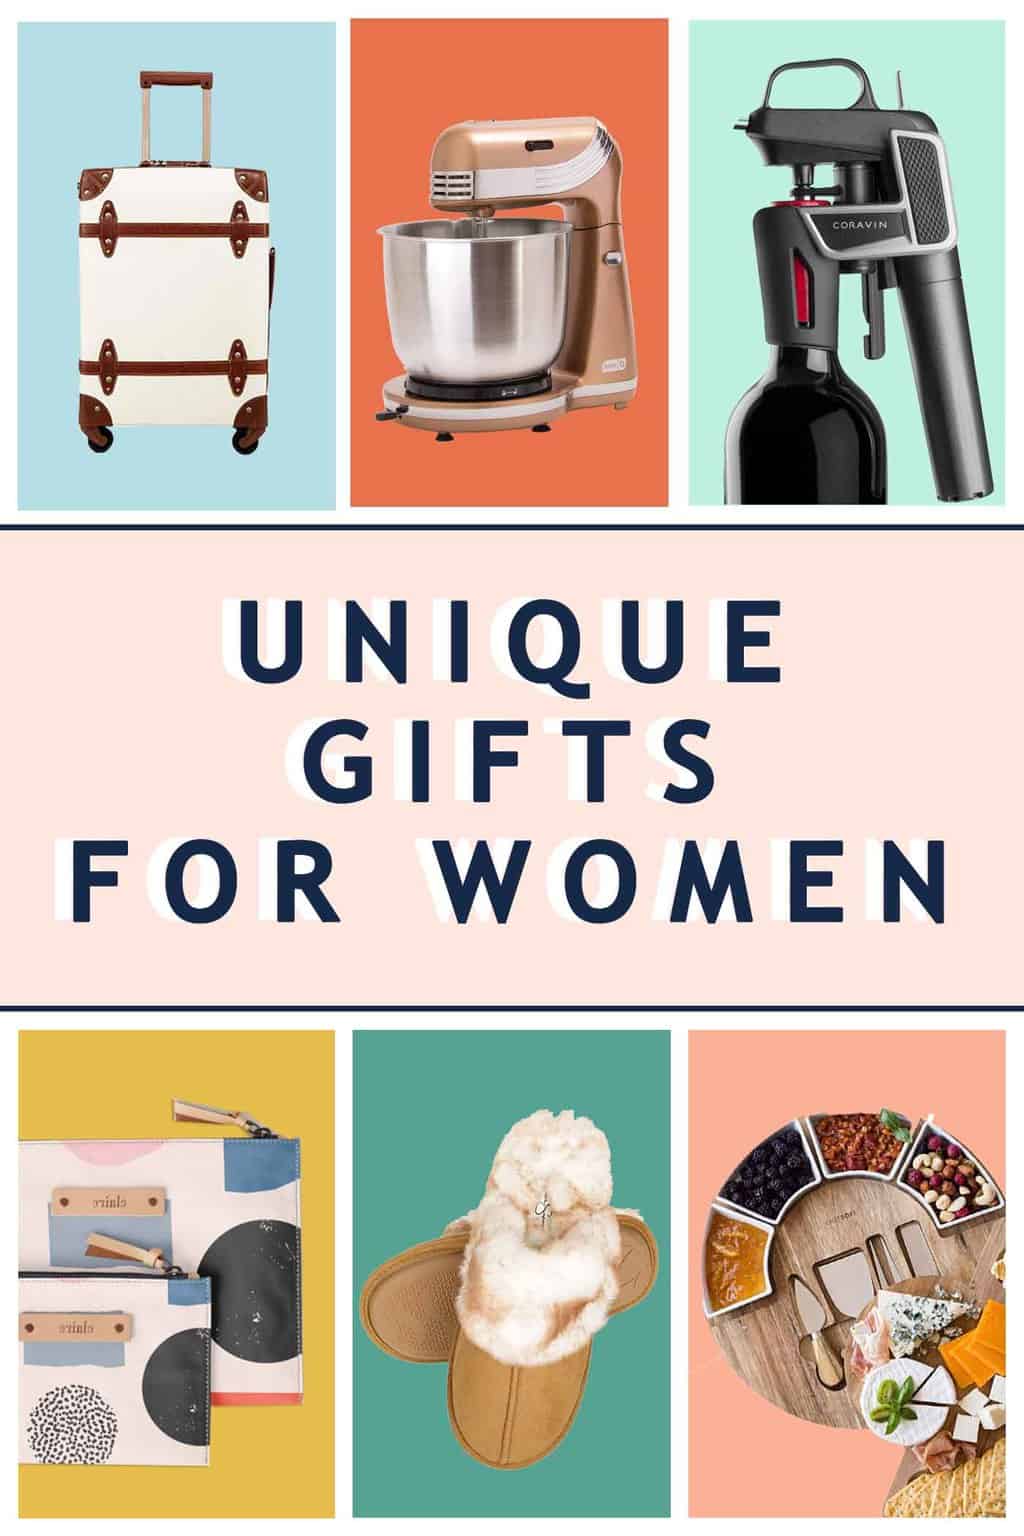 18 Unique Gifts For Women For Any Occasion — Sugar & Cloth